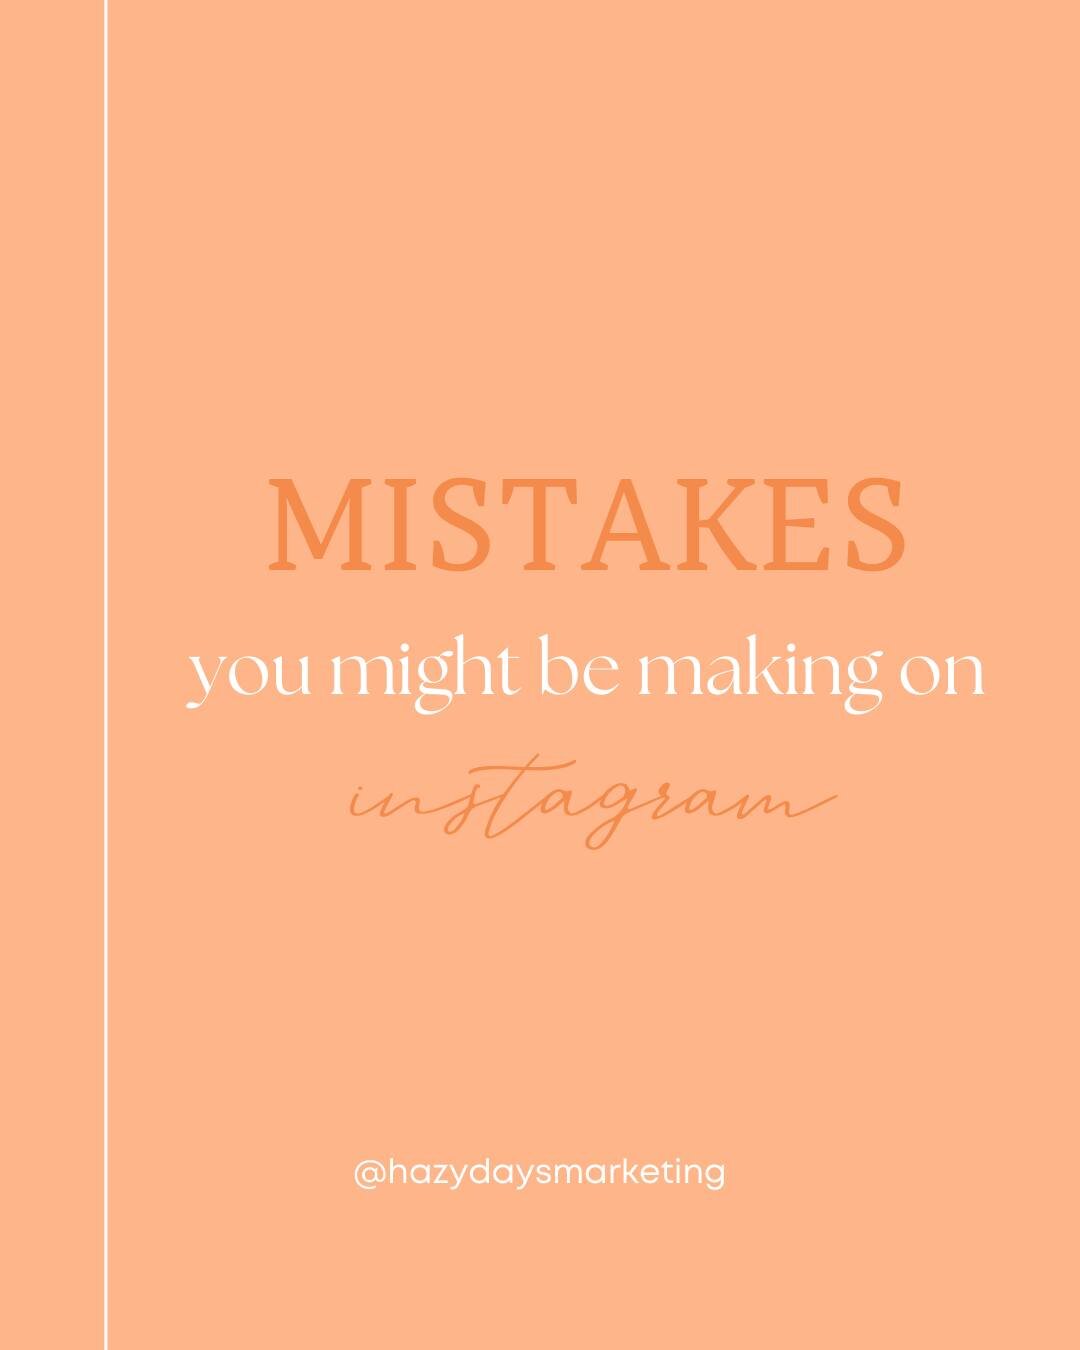 Simple mistakes you might be making on Instagram that you think aren&rsquo;t a big deal&hellip; but might well be! 🚀

You might think that only following trends will get you seen. But, this isn't always the case. Always opt for authenticity over tre